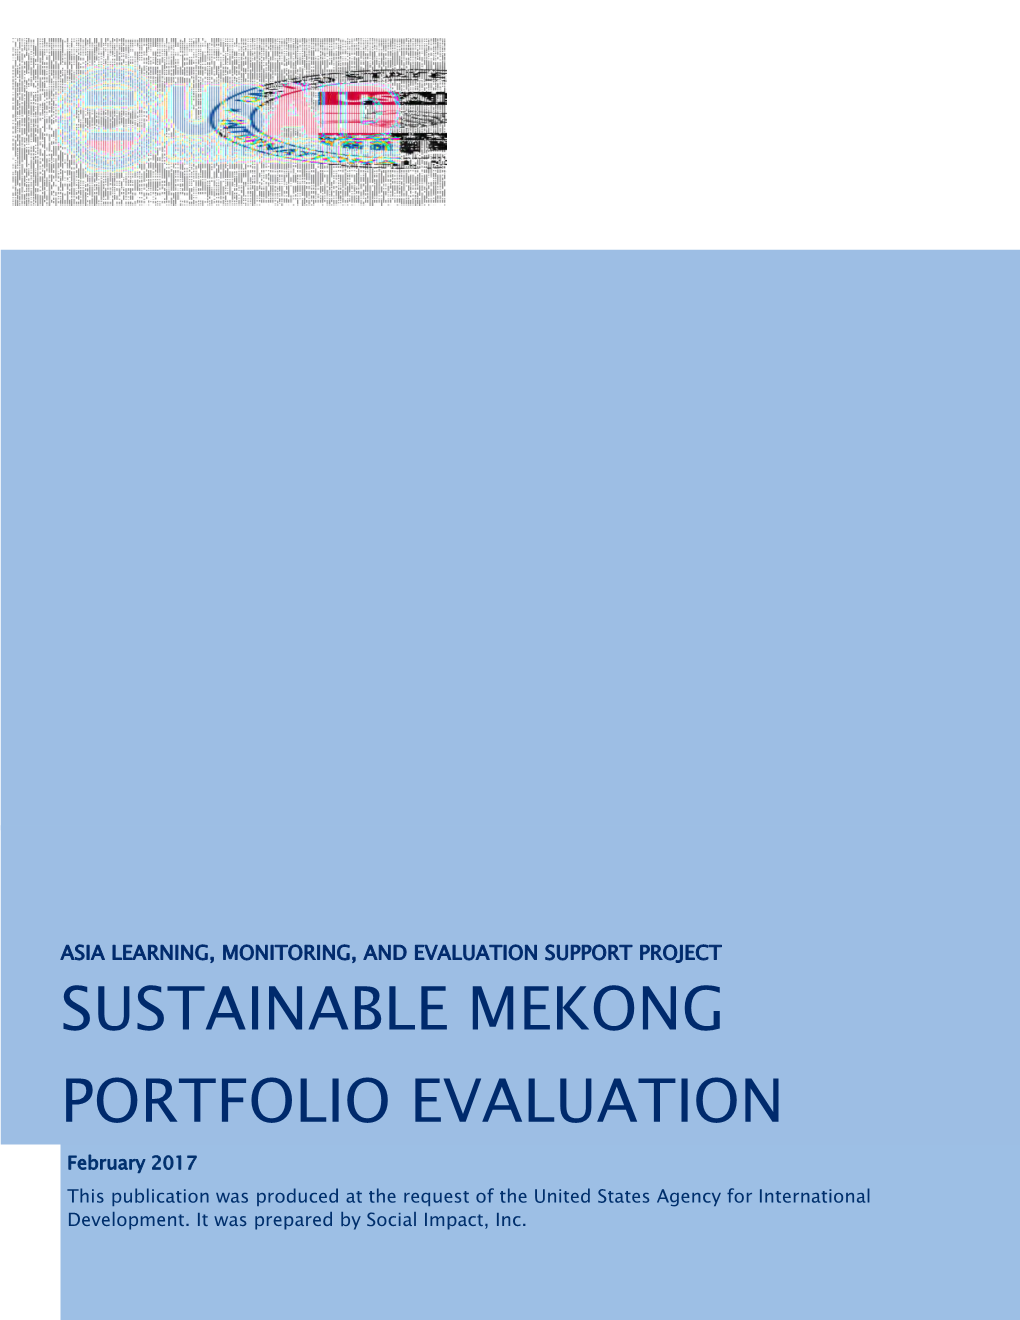 SUSTAINABLE MEKONG PORTFOLIO EVALUATION February 2017 This Publication Was Produced at the Request of The1 United States Agency for International Development